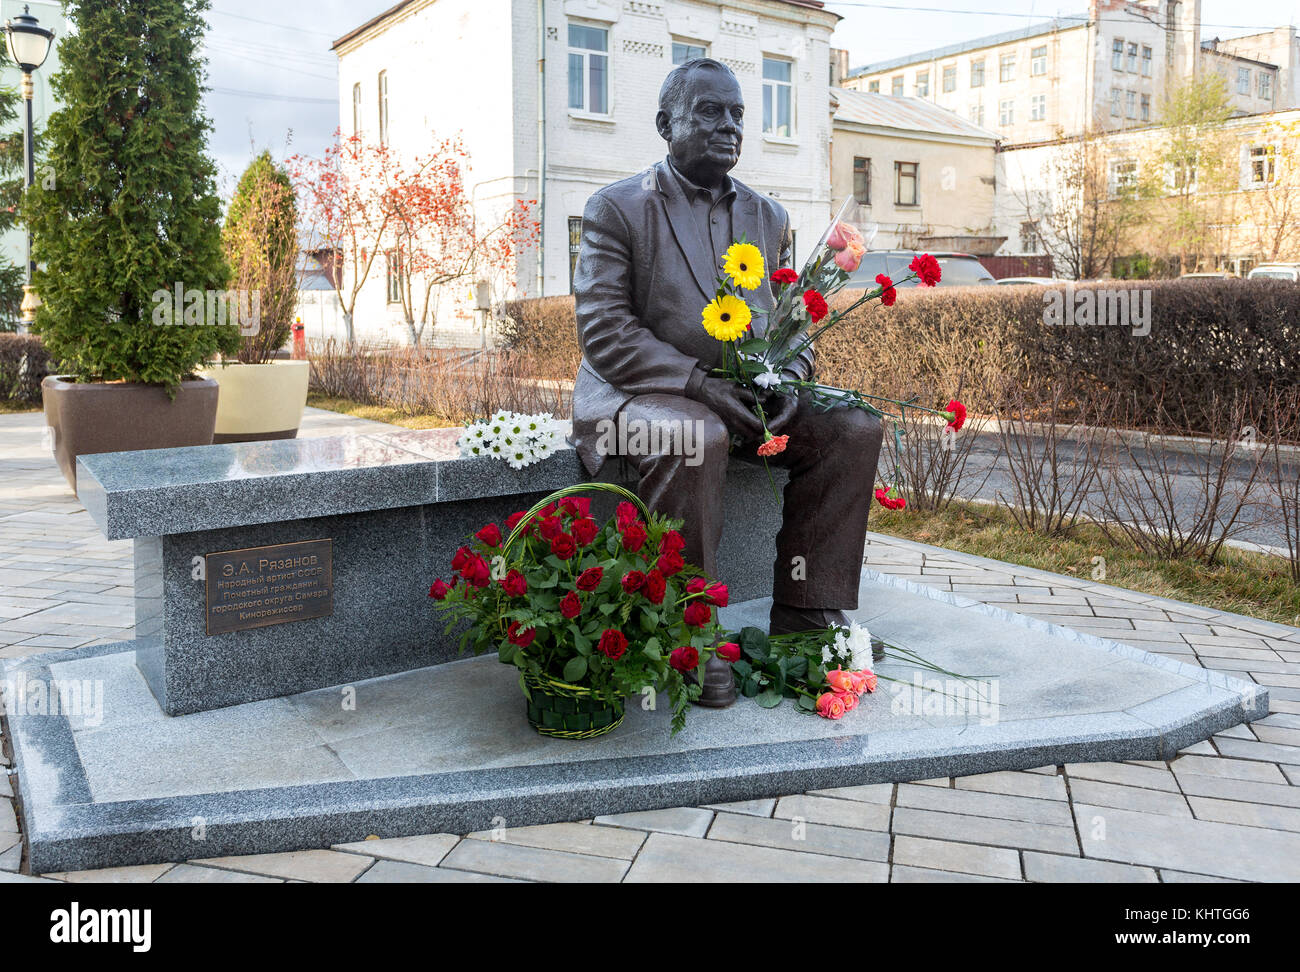 Samara, Russia - November 18, 2017: Monument to the famous Russian film director Eldar Ryazanov (1927 - 2015). Monument was unveiled on October 2017,  Stock Photo